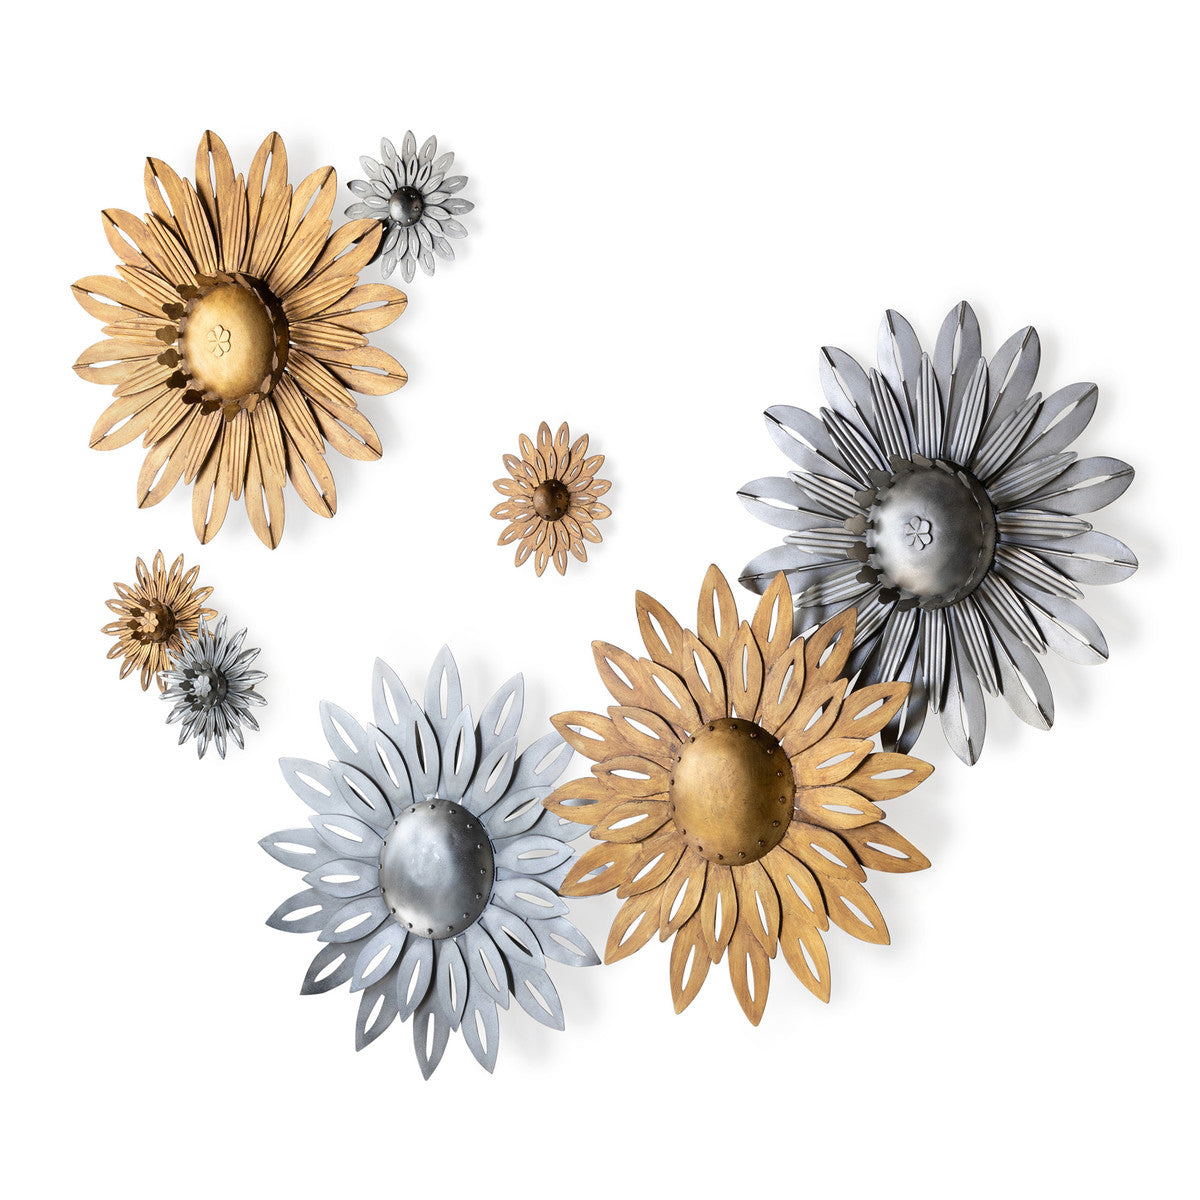 Aged Nickel Wall Sunflower, Large